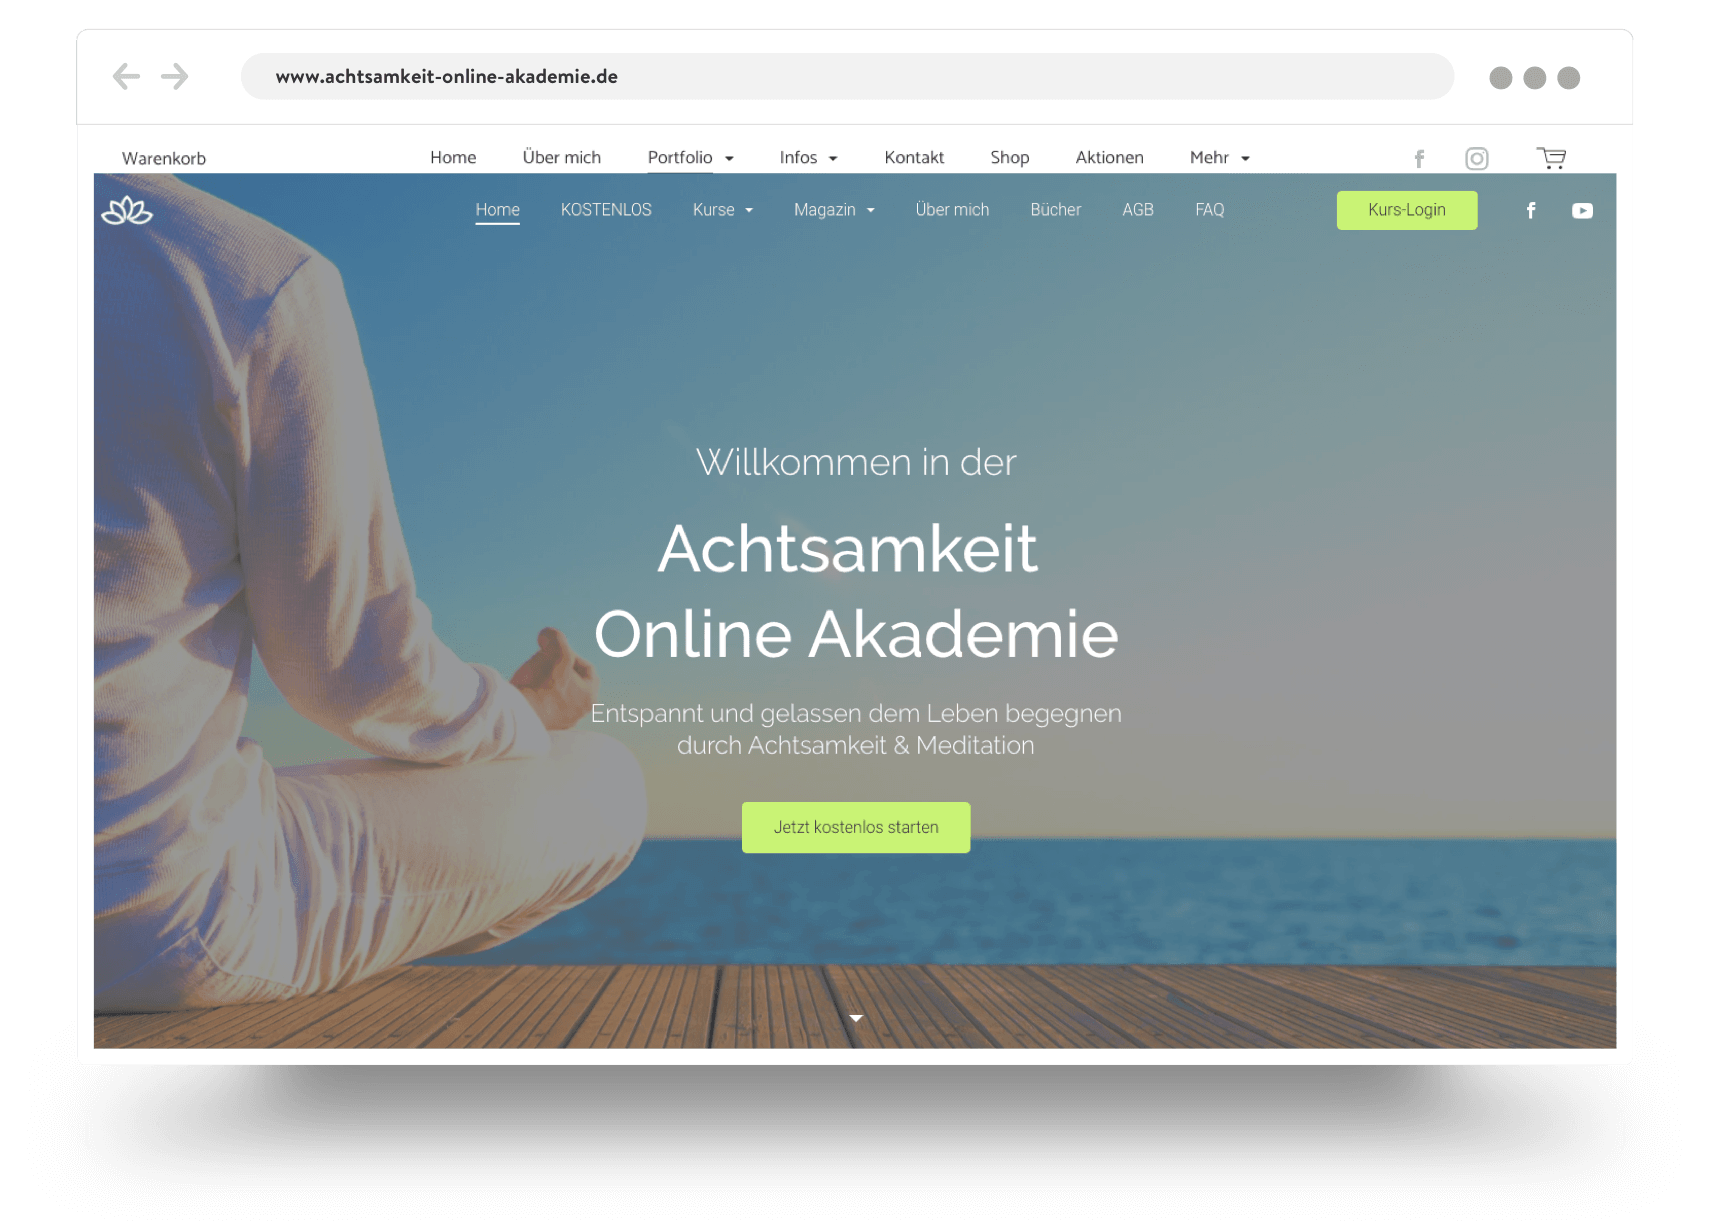 Example of a website homepage for an online mindful academy showing a person sitting cross-legged looking out across the ocean 